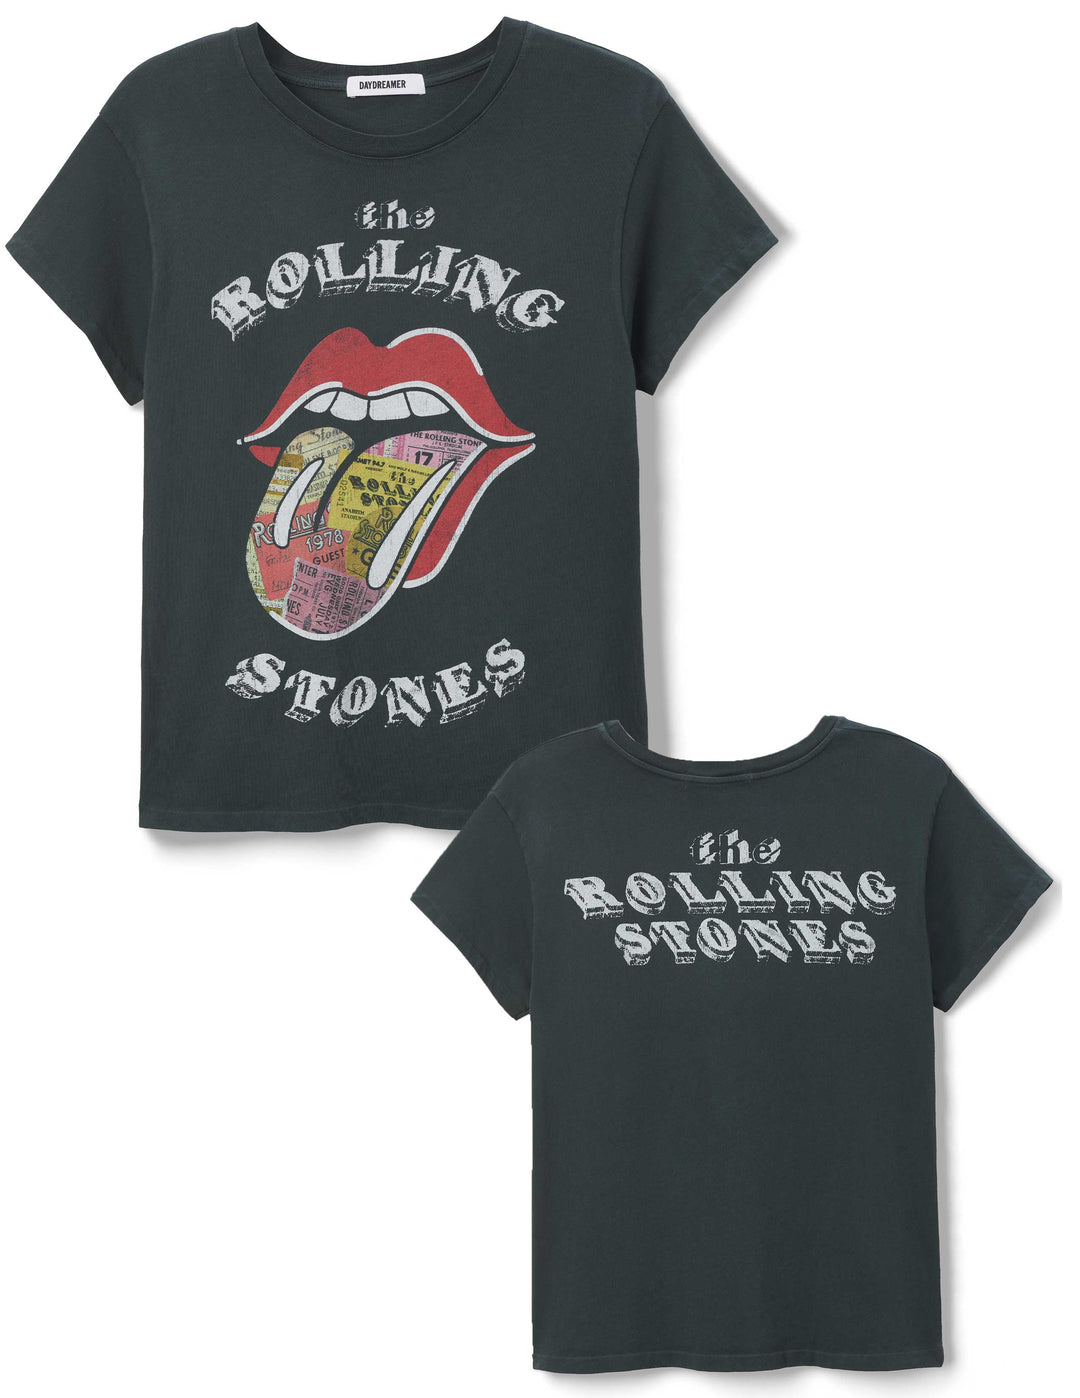 ROLLING STONES TICKET FILL TONGUE TOUR TEE-VINTAGE BLACK